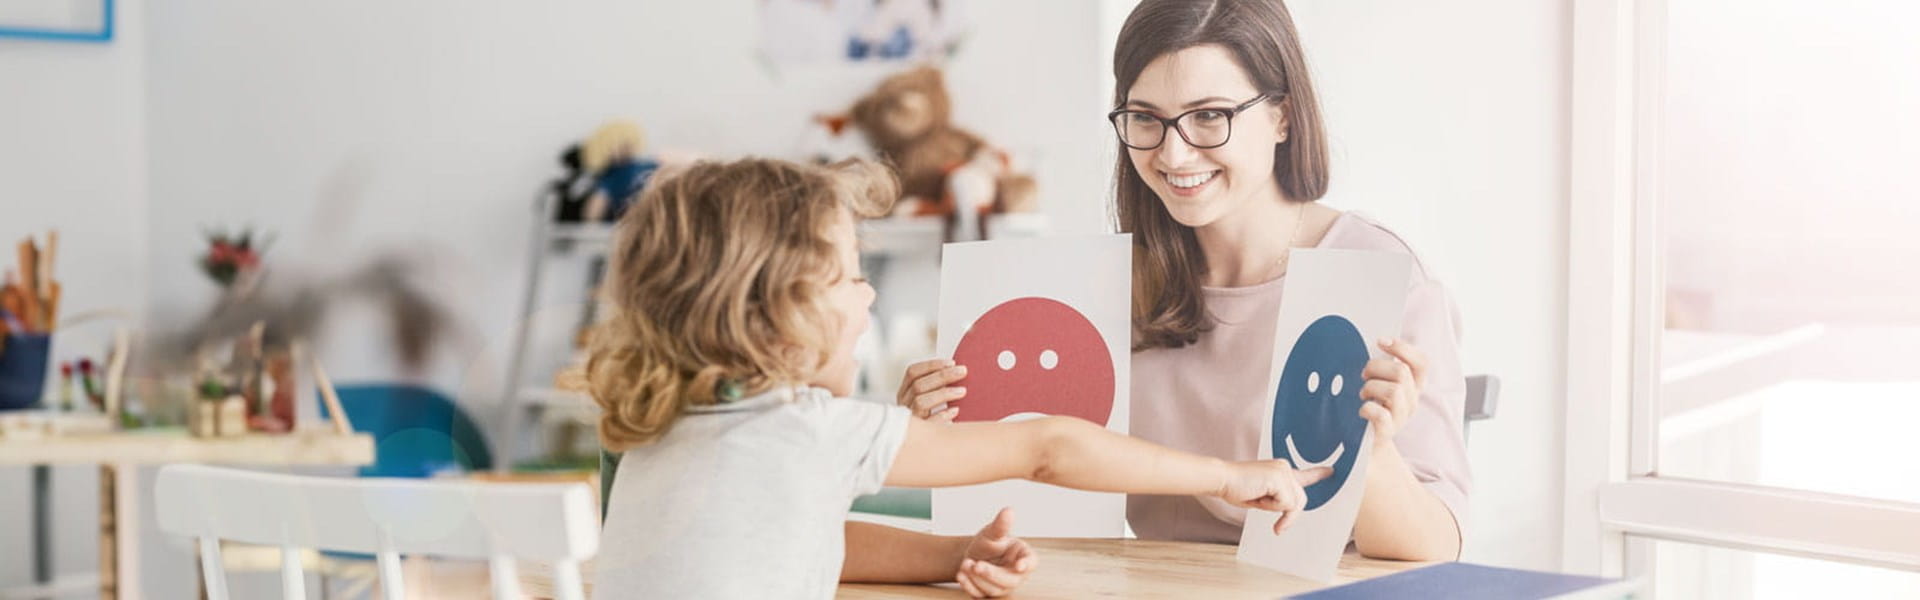 female psychologist working with a child and showing pictures on emotions